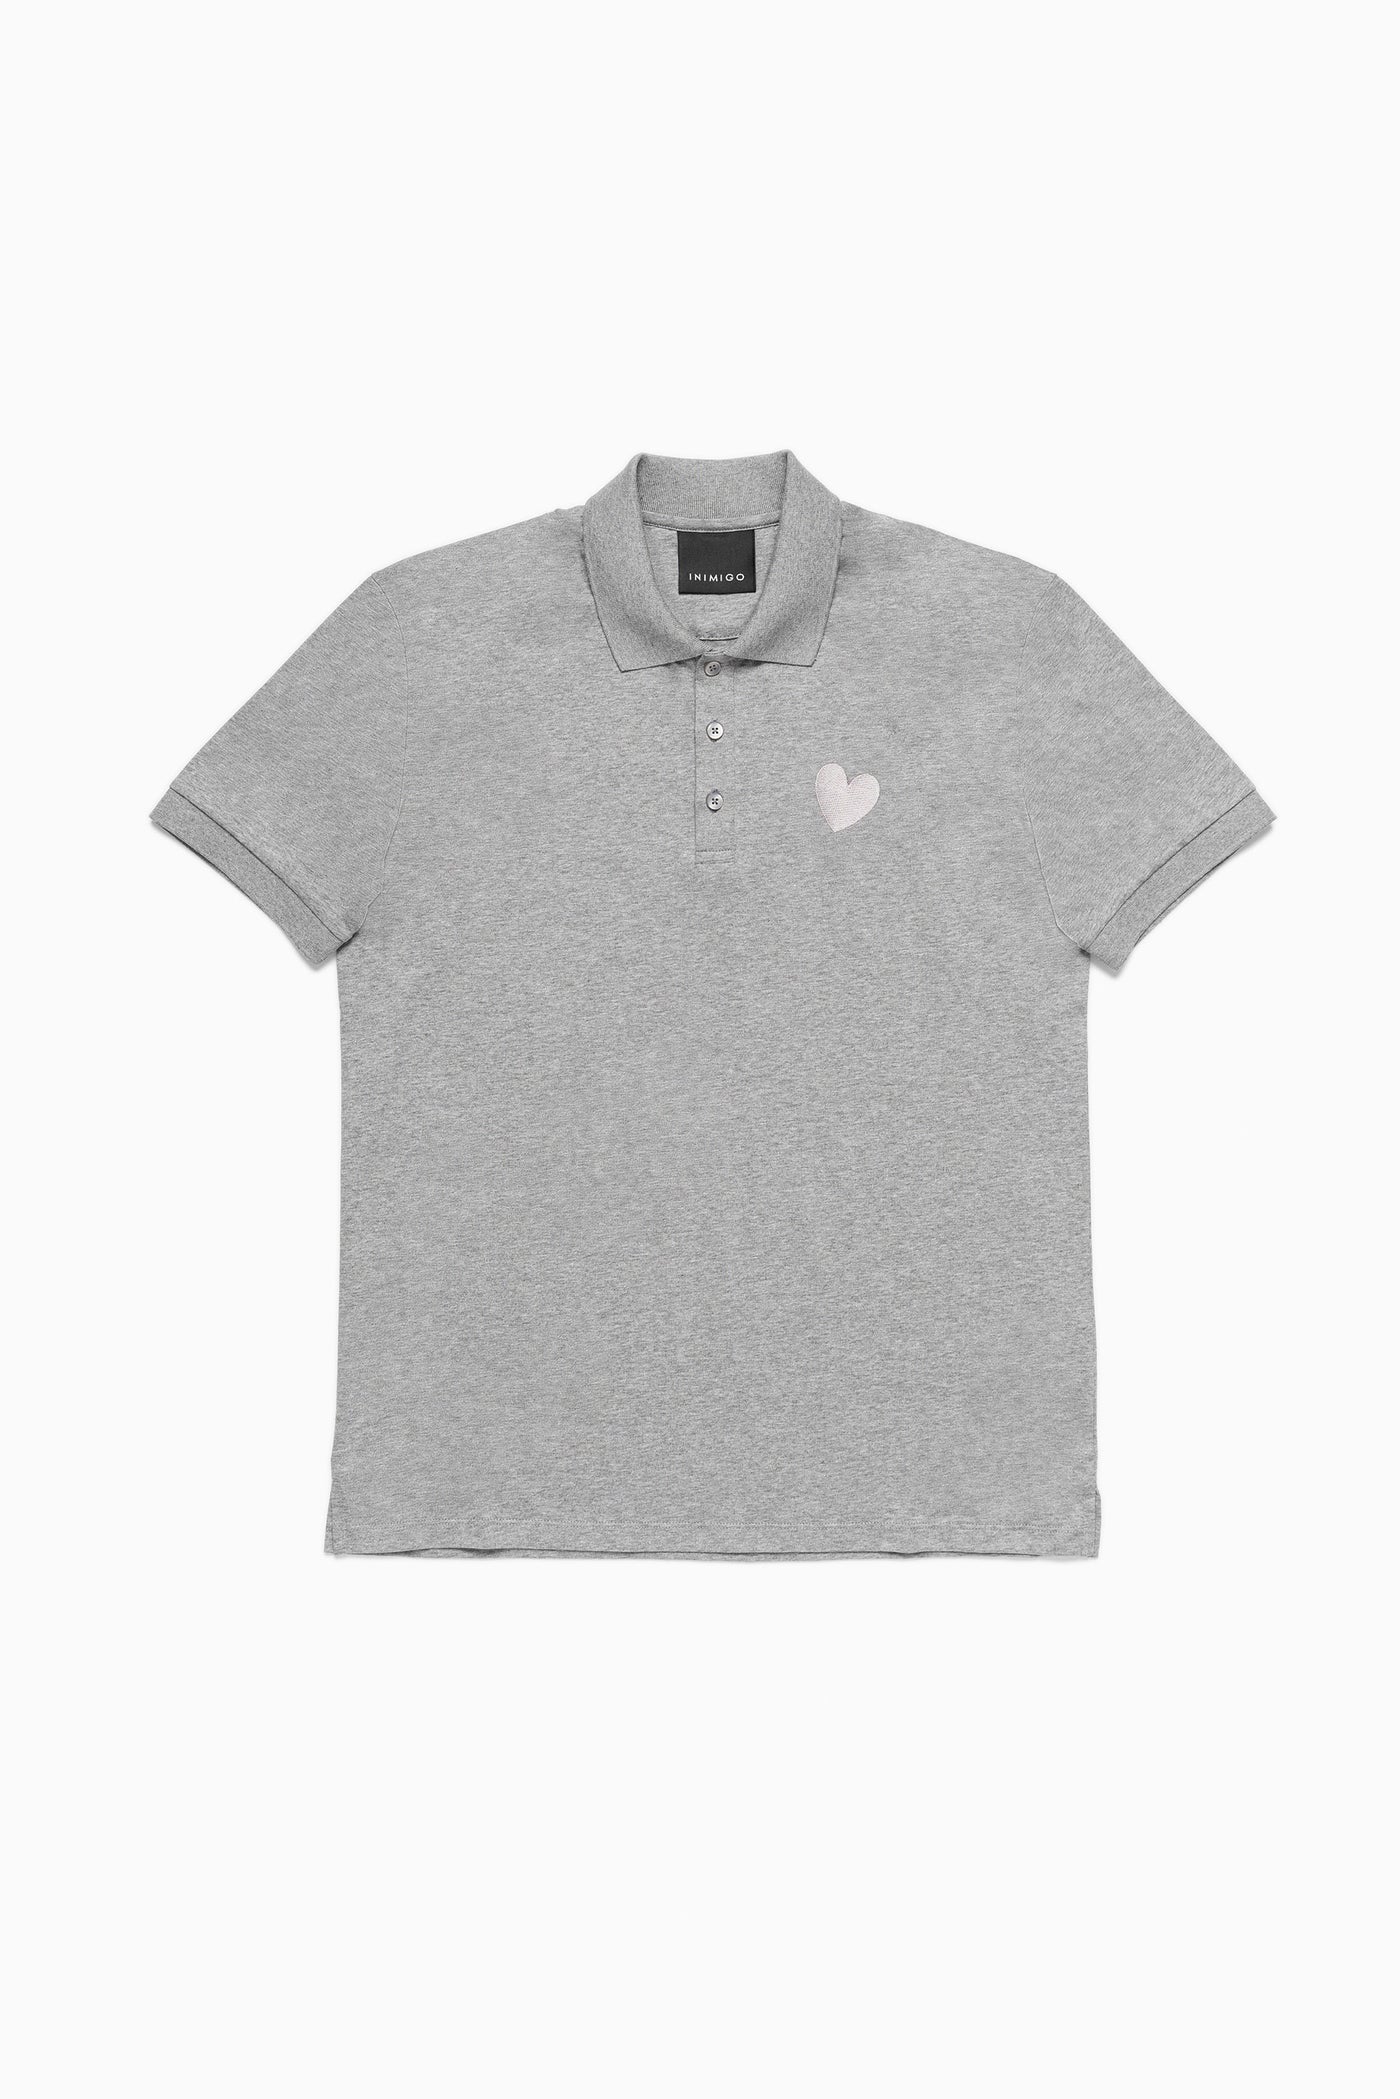 Classic Embroidery Heart Jersey Gray Polo